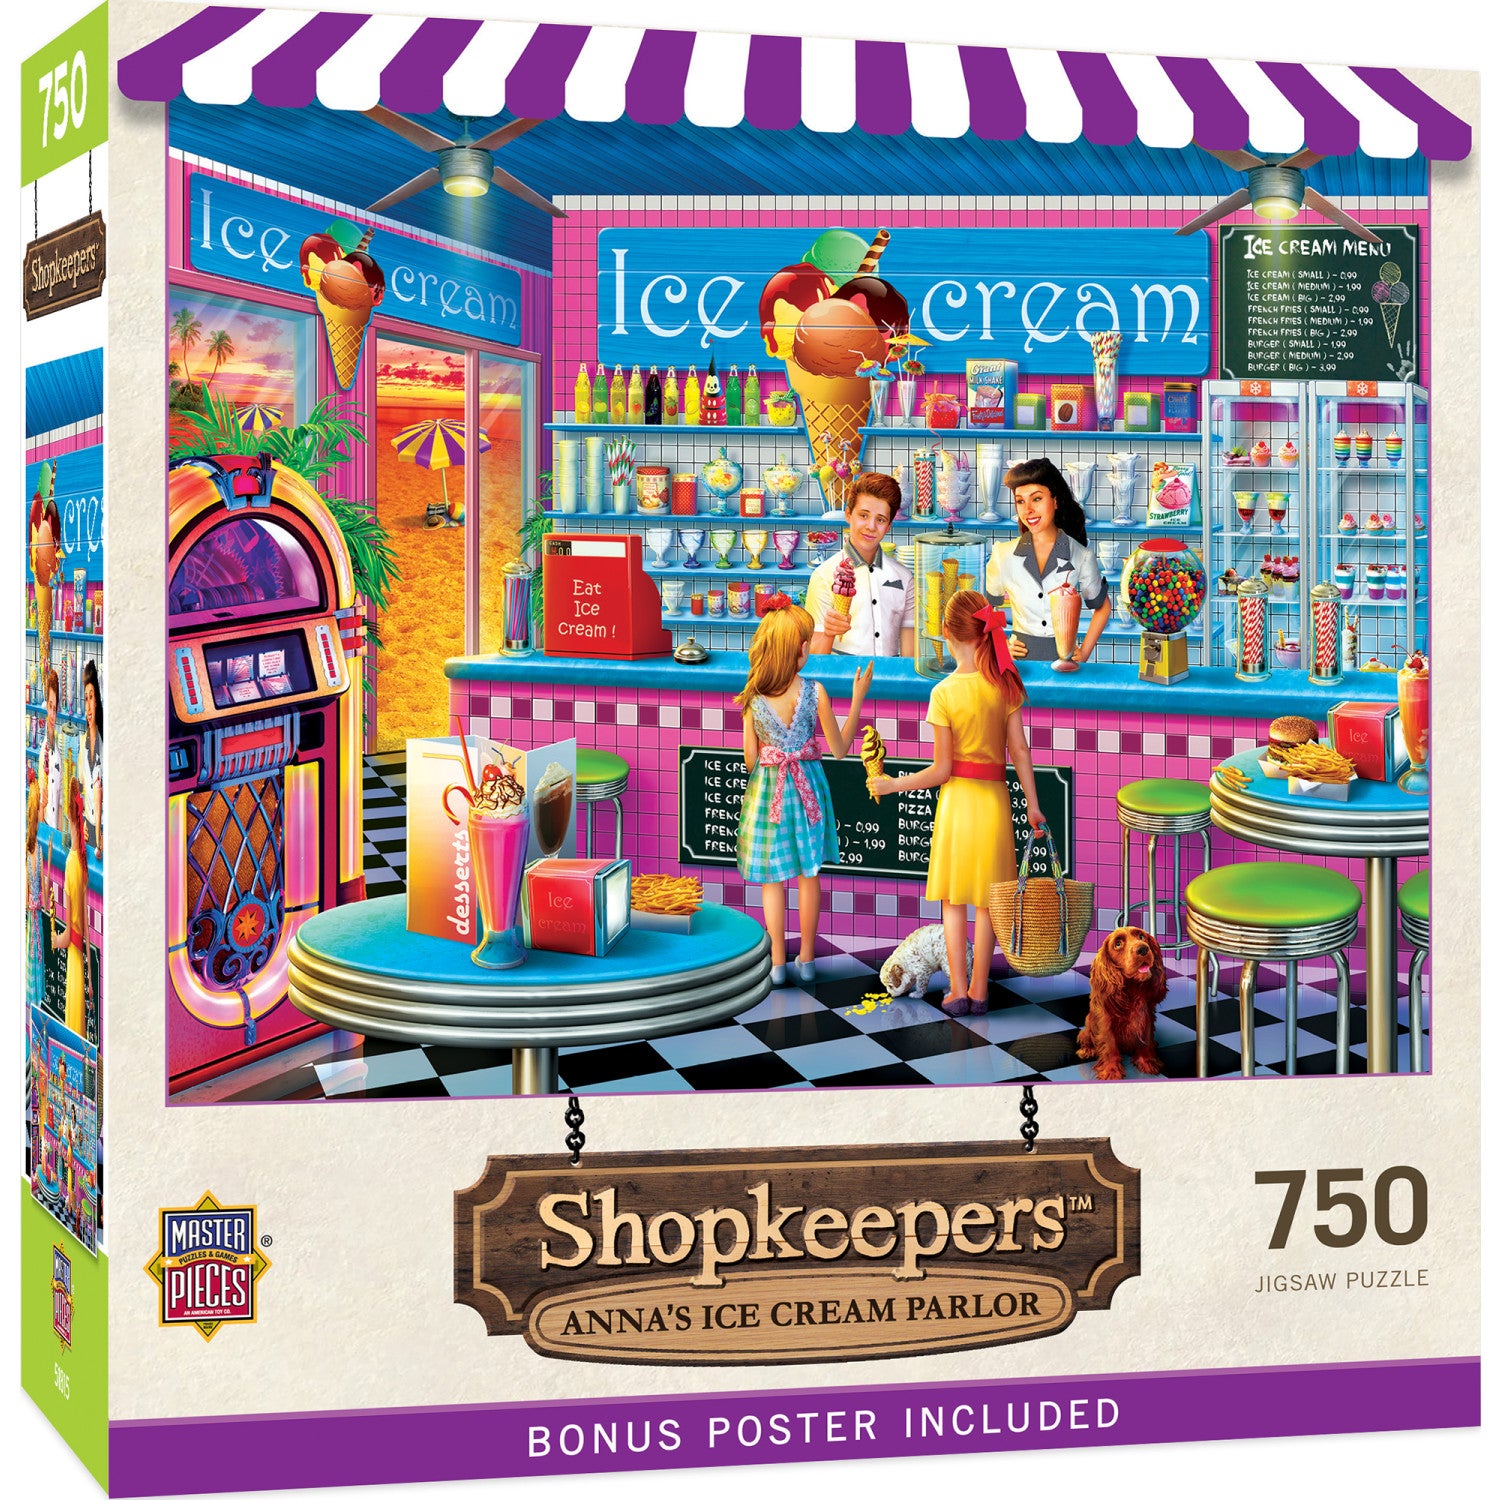 Shopkeepers - Anna's Ice Cream Parlor 750 Piece Puzzle